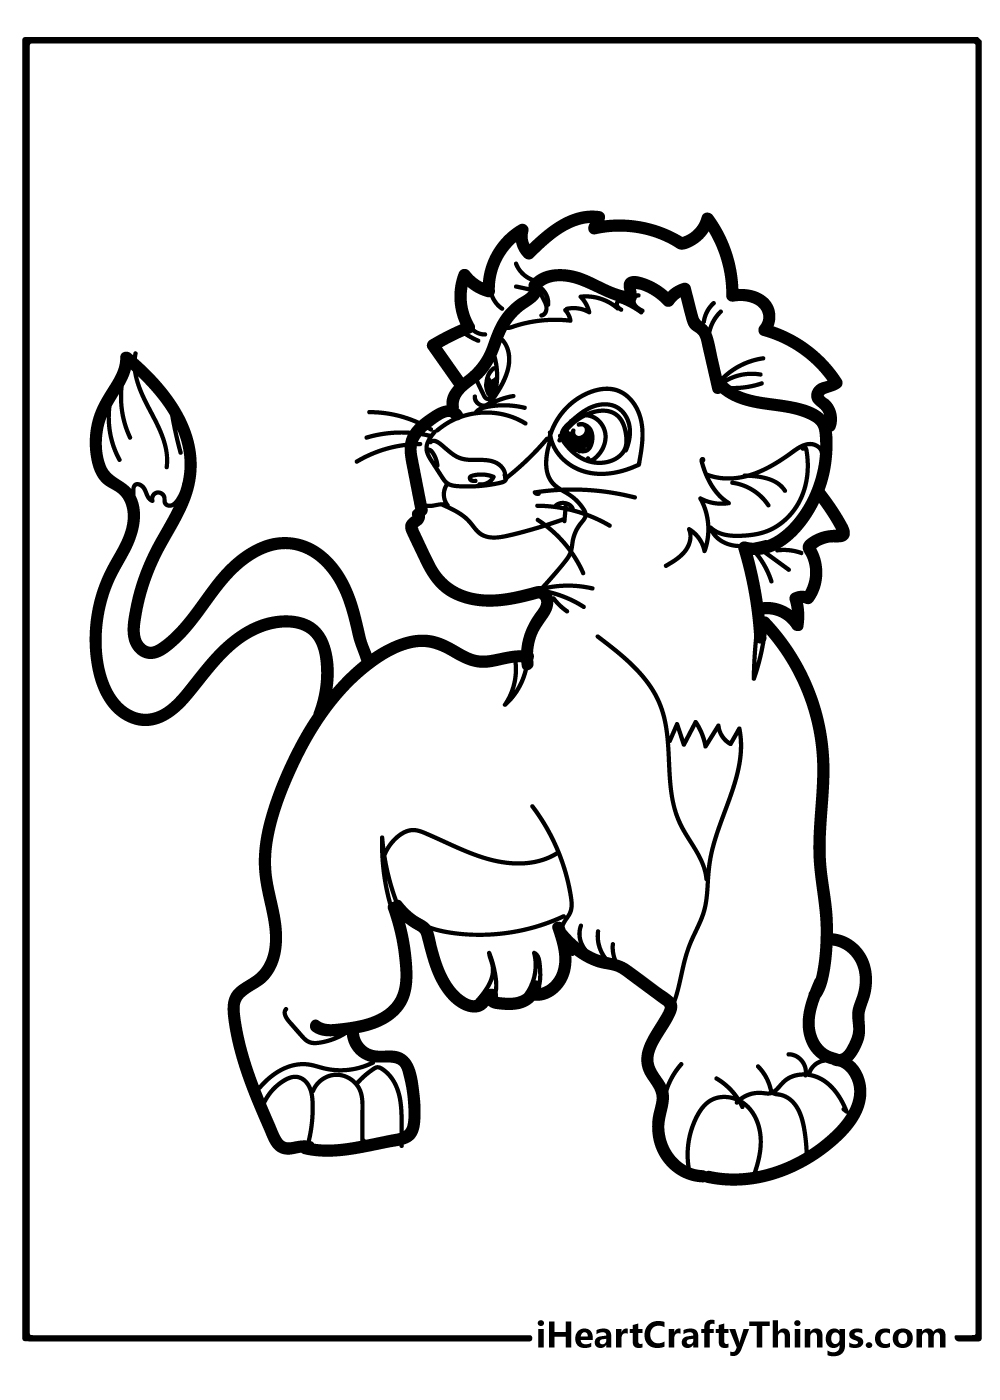 Lion Coloring Pages for preschoolers free printable